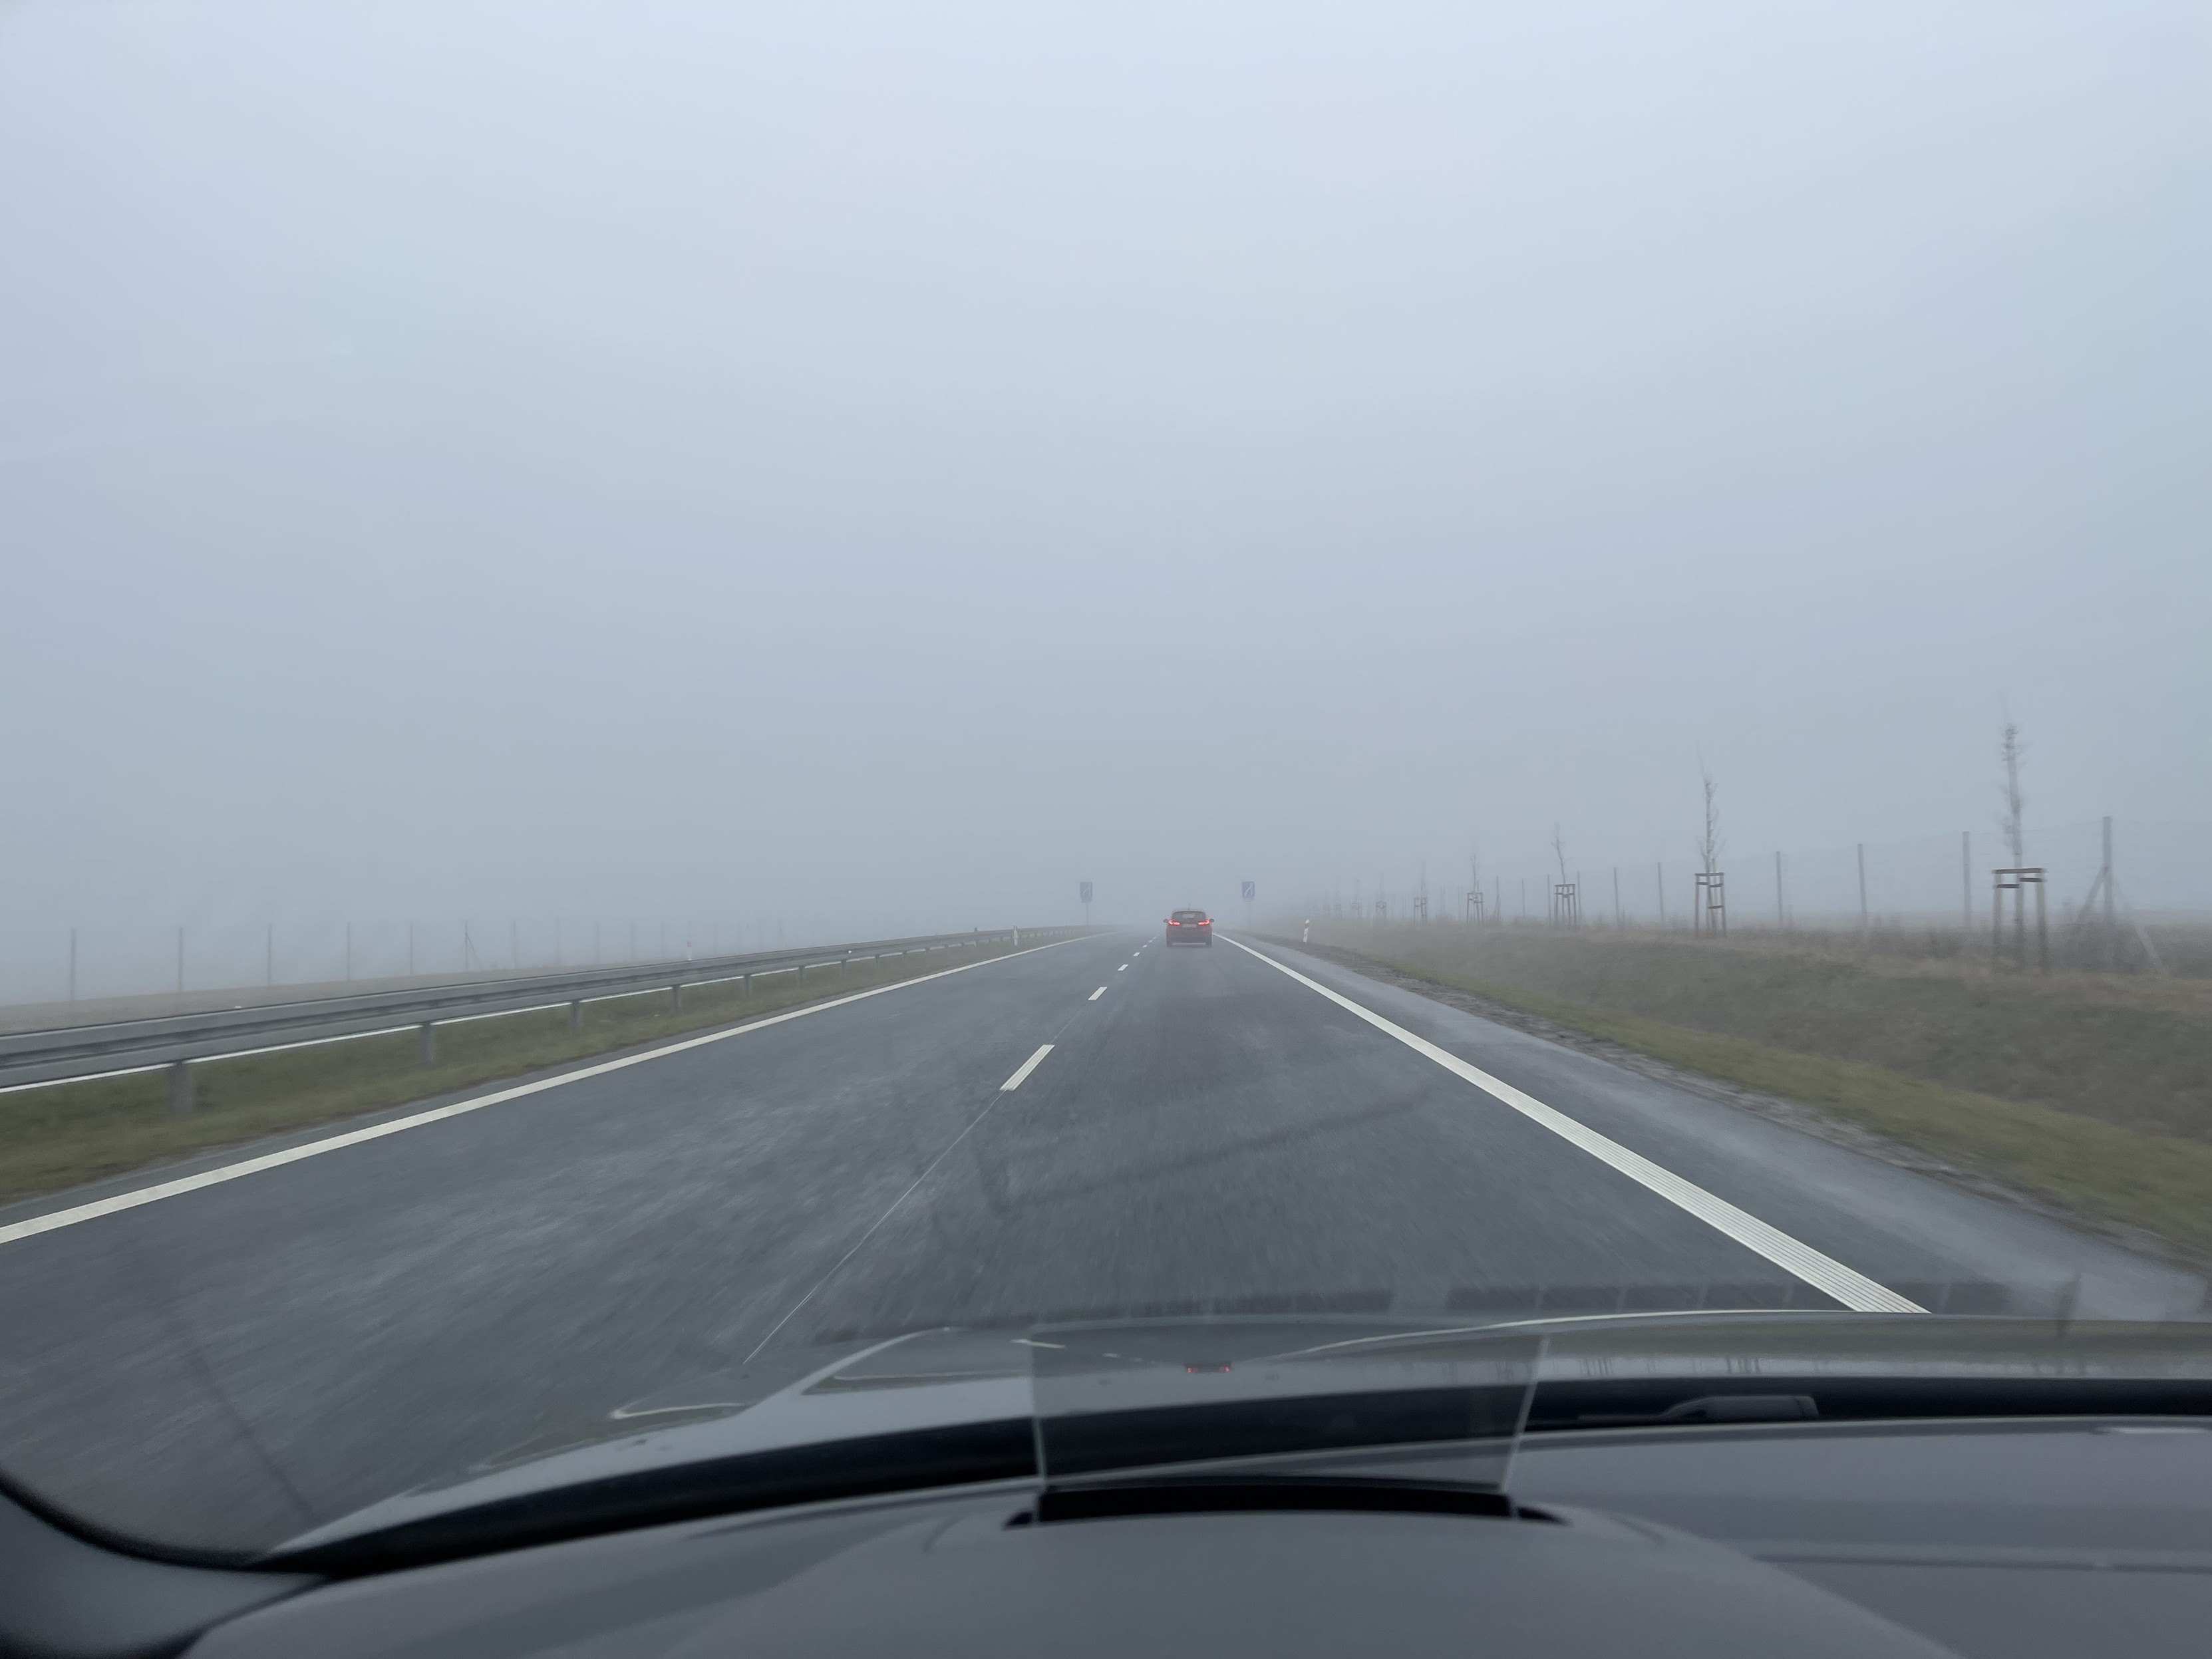 View from inside a car driving on a highway in foggy weather conditions.